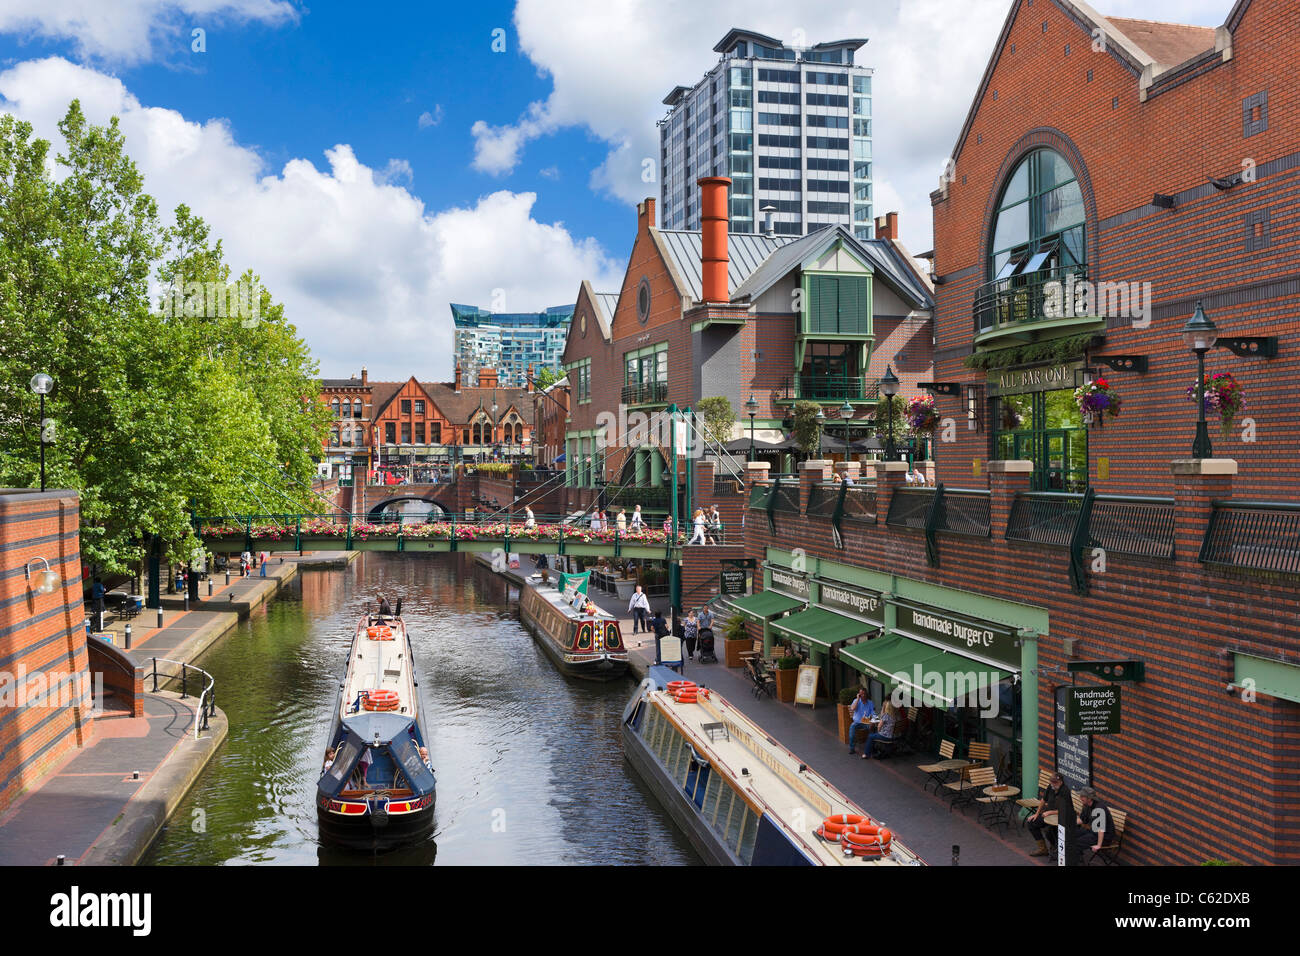 Narrowboats in front of restaurants on the canal at Brindley Place, Birmingham, West Midlands, England, UK Stock Photo